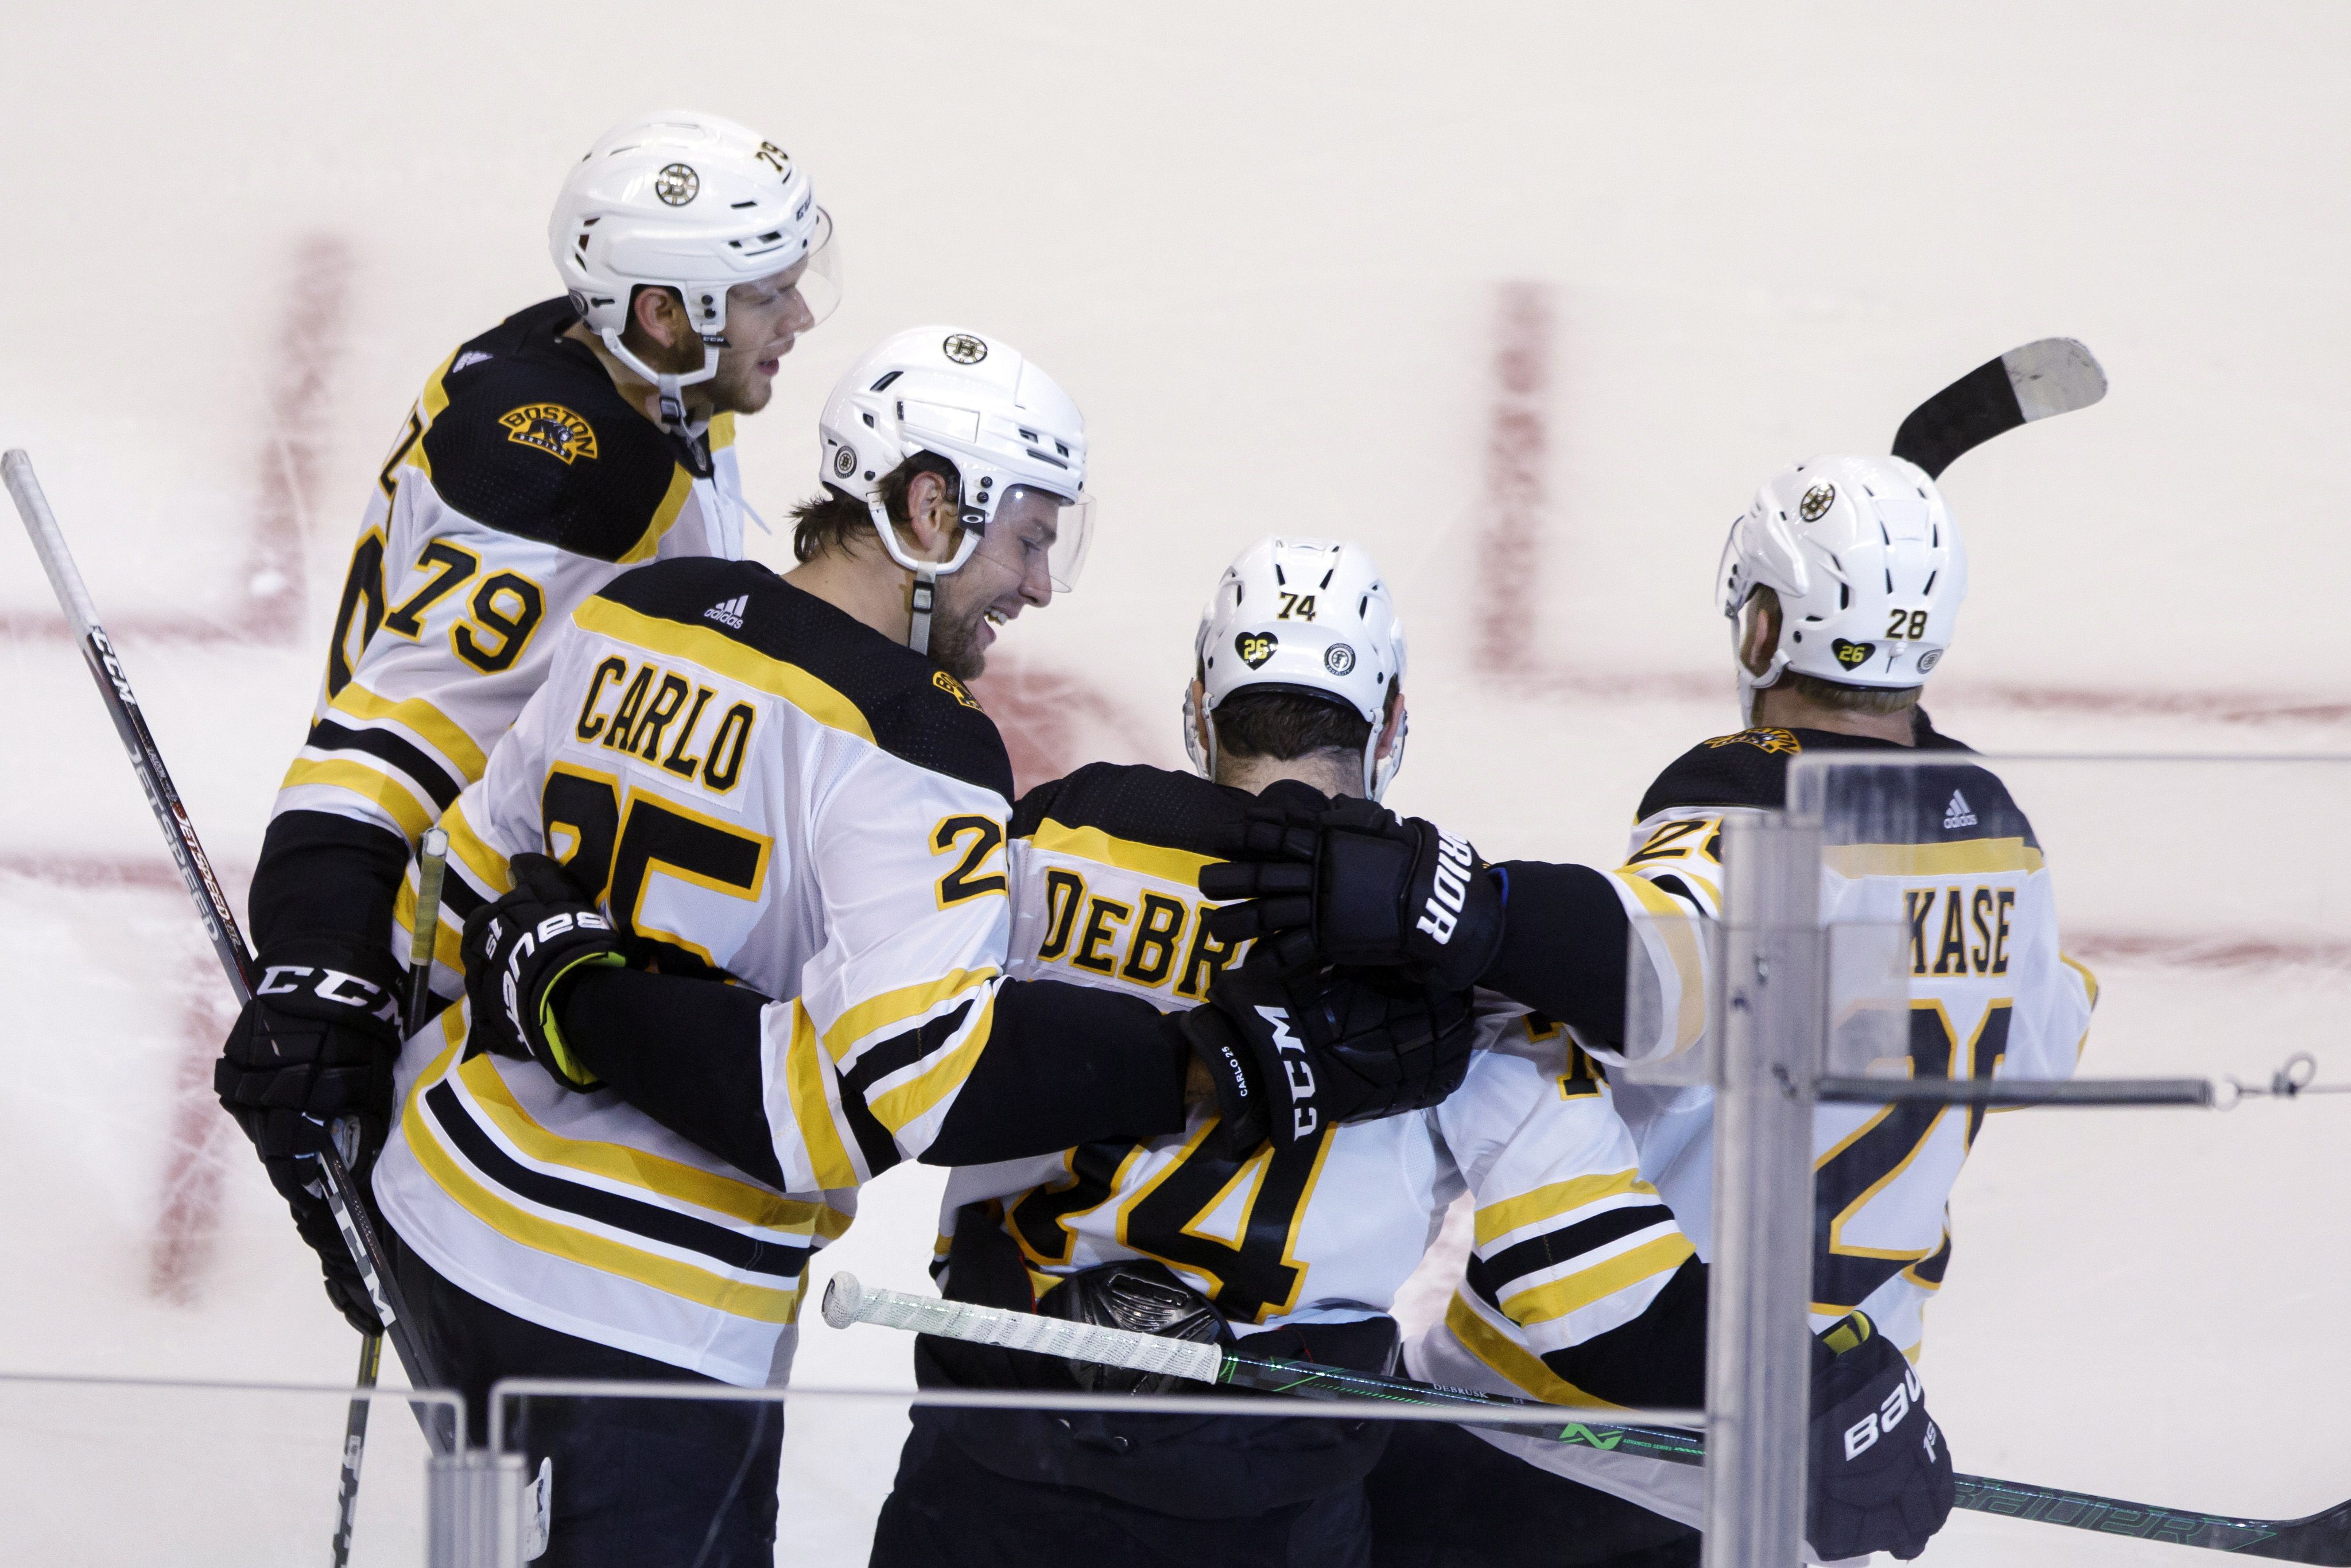 Loss is a reality check for champion Bruins - The Boston Globe